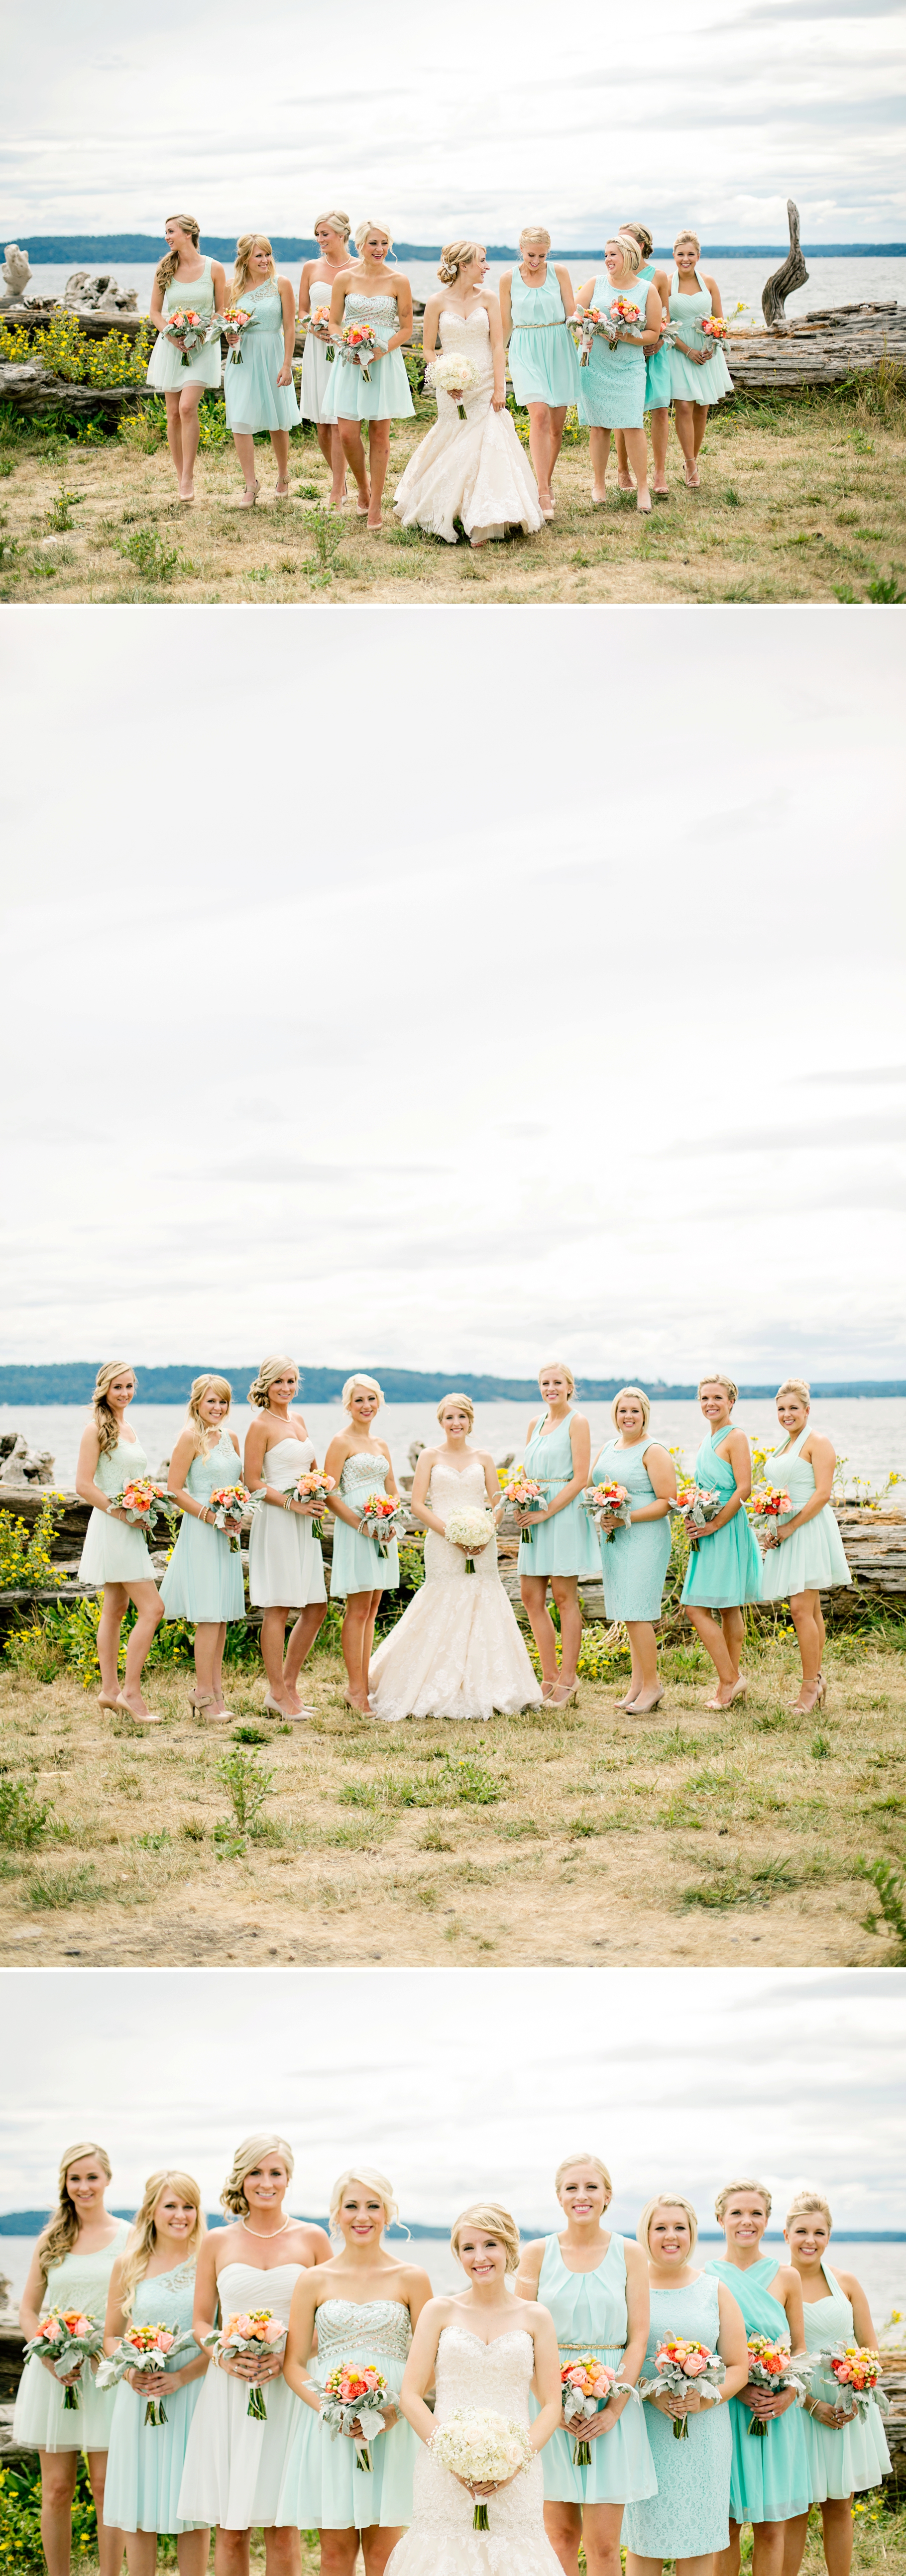 19-Bridesmaid-Bride-Portraits-Bouquets-Colorful-Dusty-Miller-Love-Blooms-Events-Florist-Waterfront-Pudget-Sound-Driftwood-Normandy-Cove-Beach-Wedding-Photographer-Bride-Groom-Seattle-Wedding-Photography-Northwest